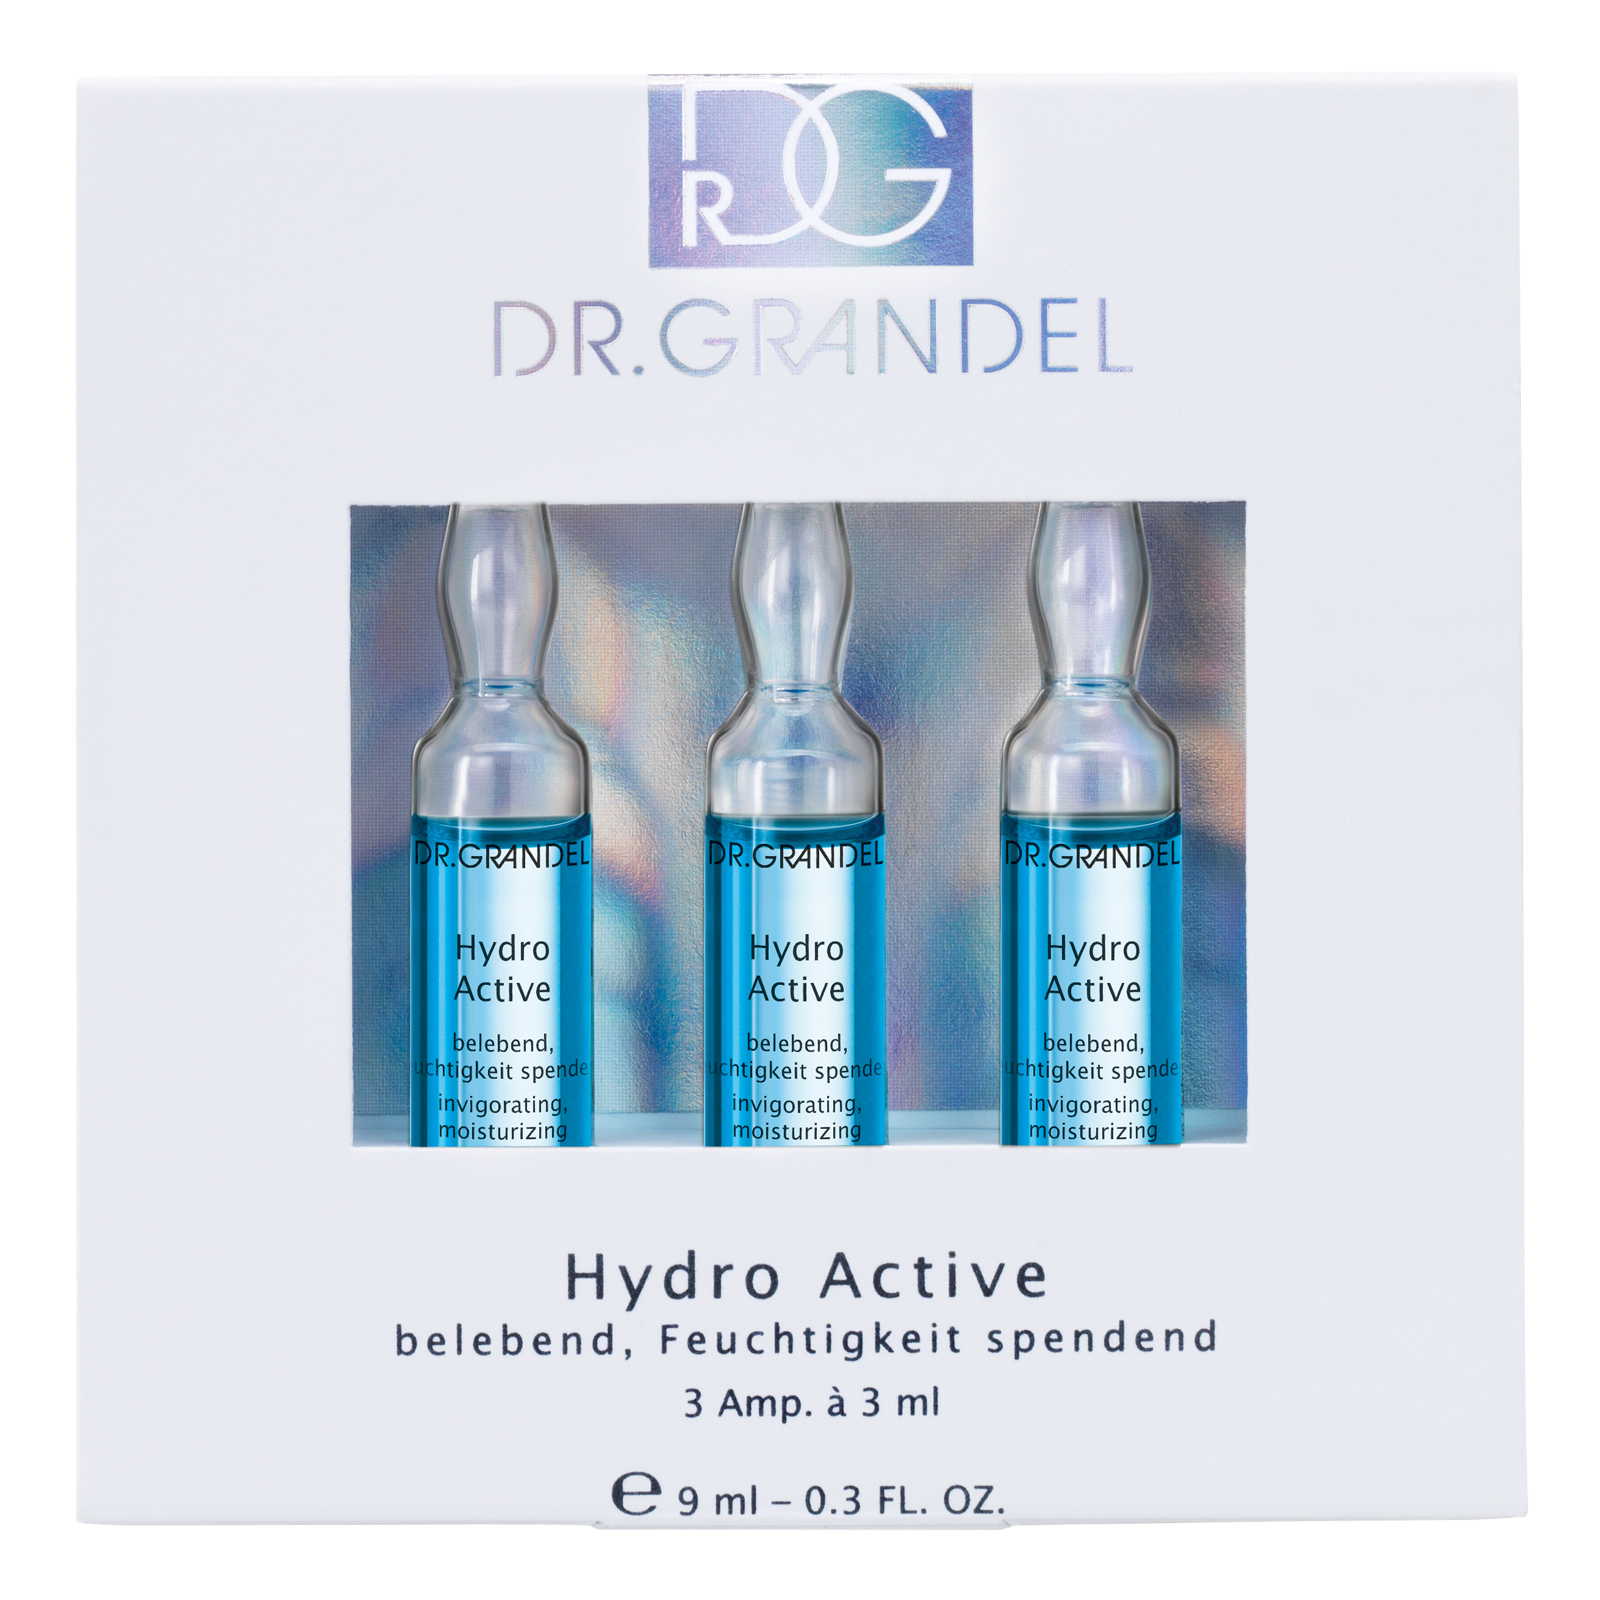 Dr. Grandel Professional Collection Hydro Active 3 X 3 ml Ampullen